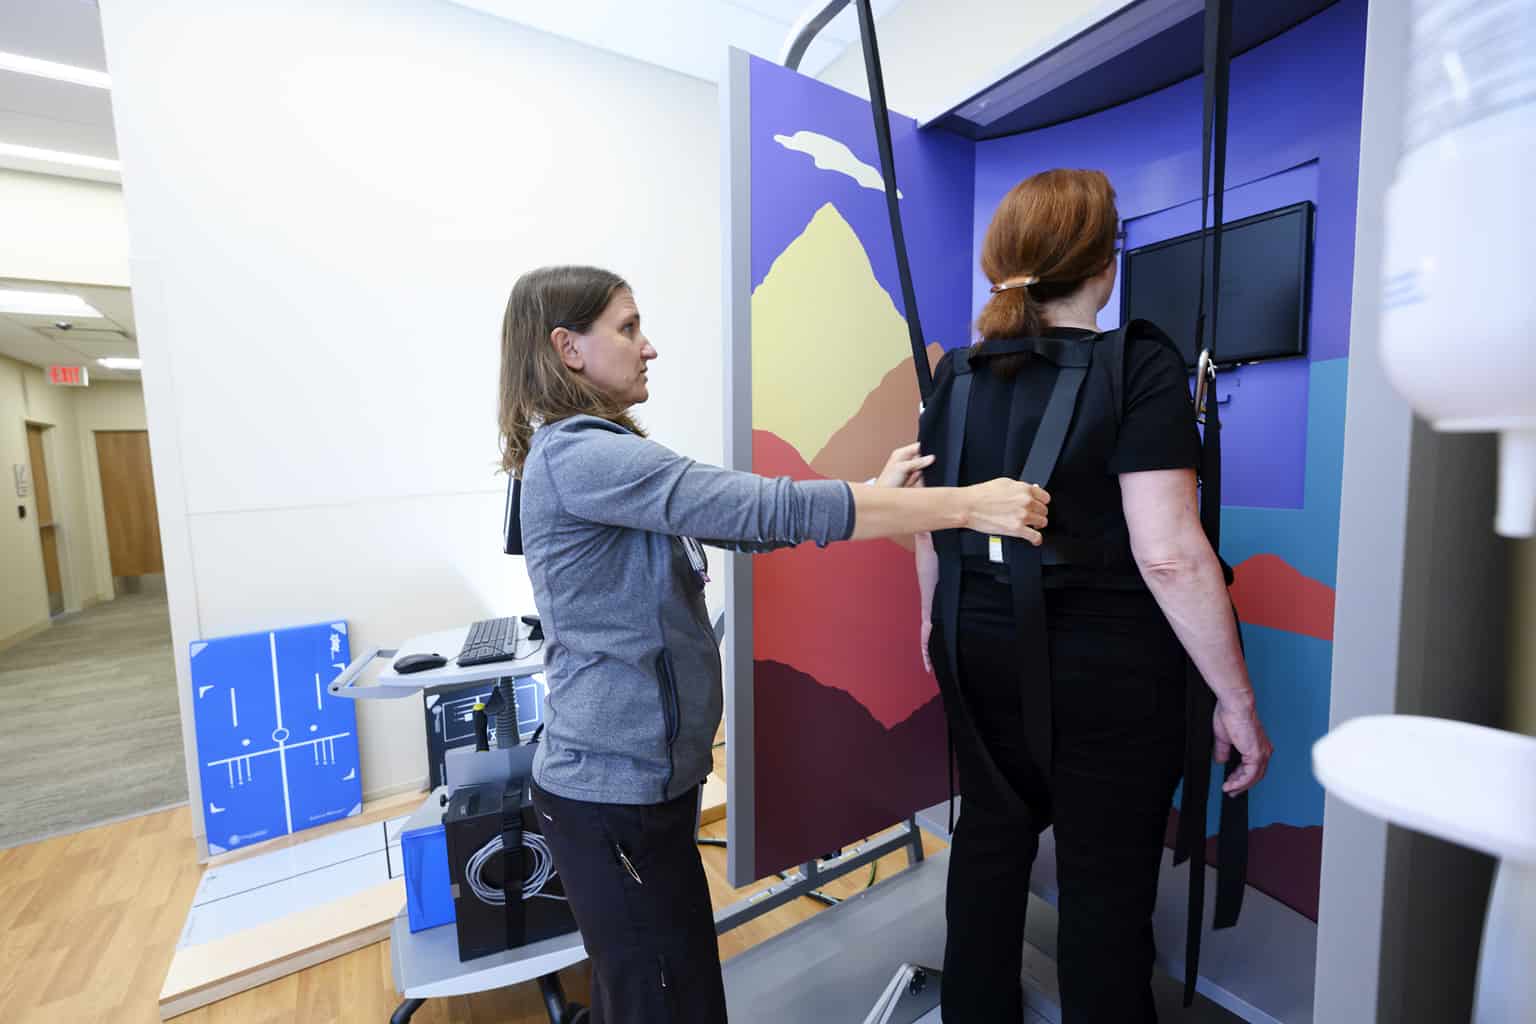 pt neurological rehabilitation tech with patient, neurological physical therapist, neuro physical therapy